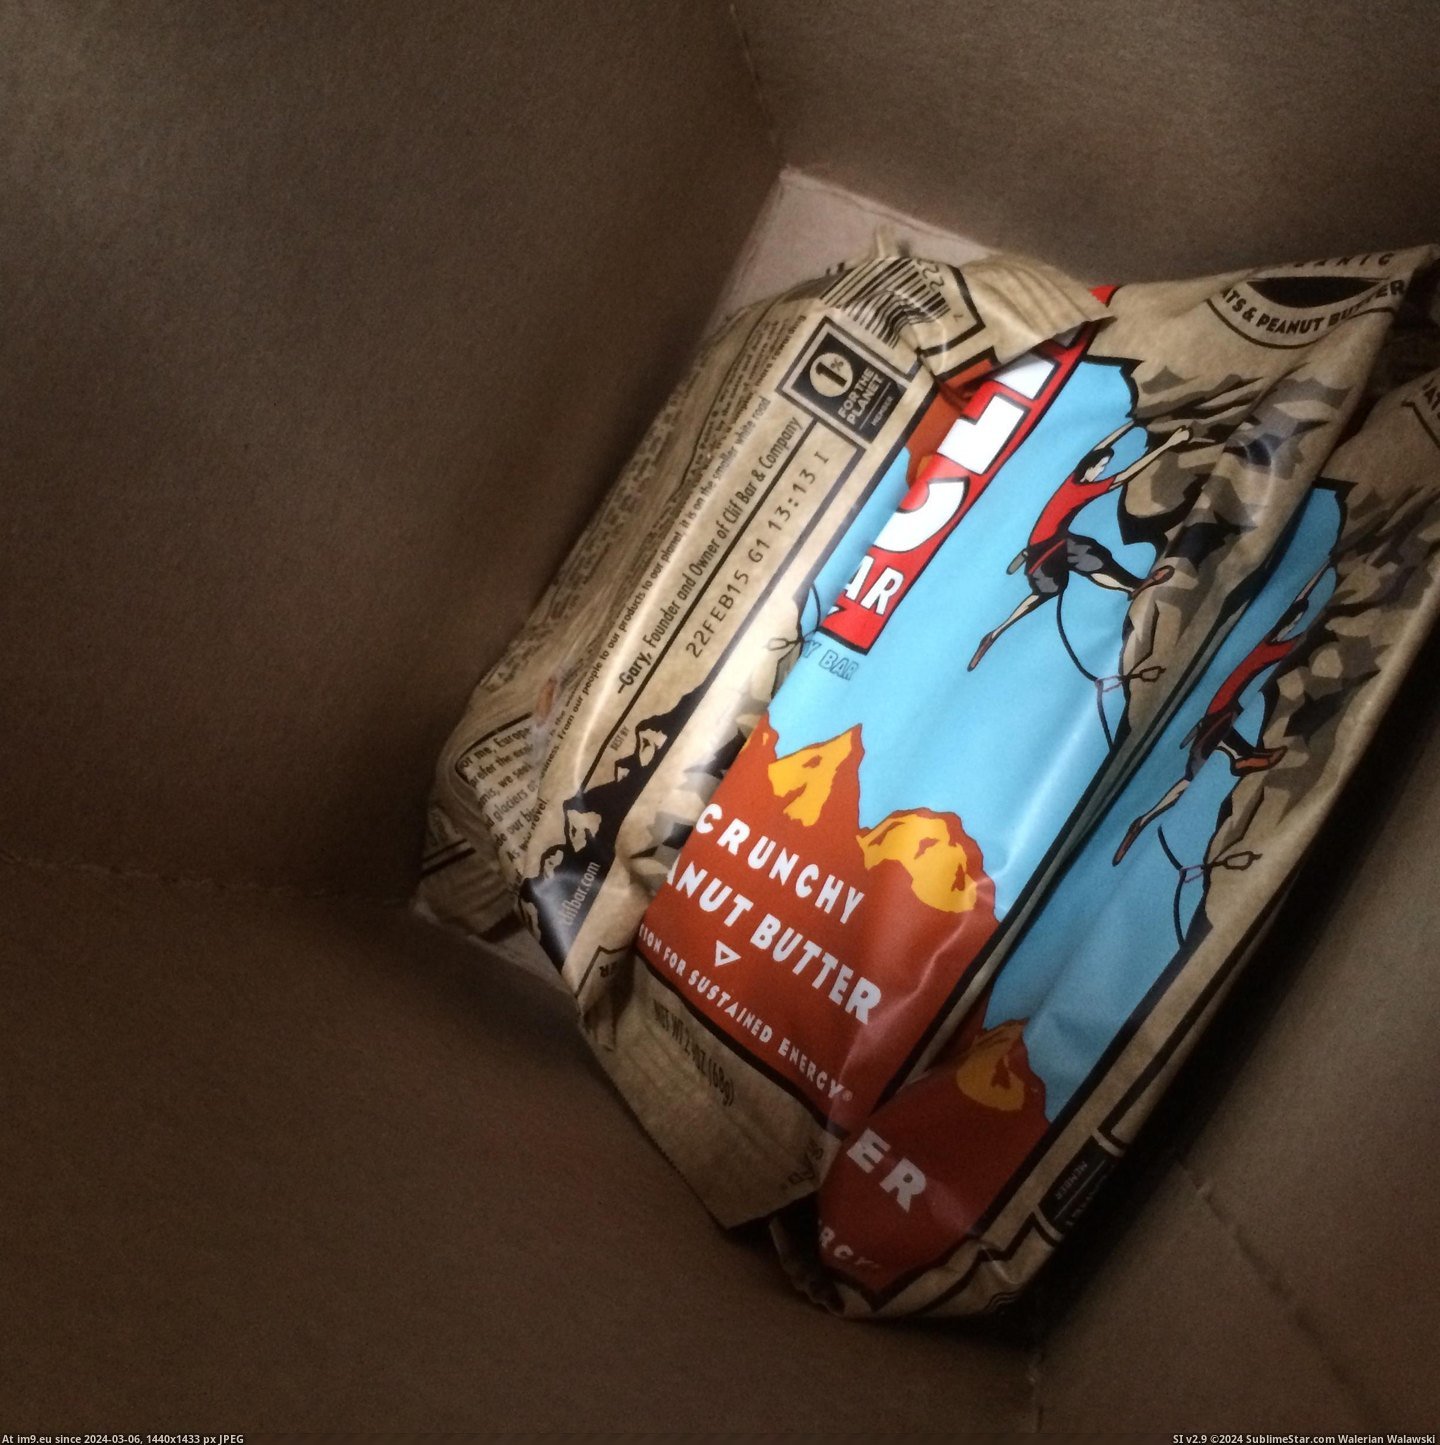 #Wtf #Way #Box #Bit #Ate #Cliff #Protein #Glad #Extra #Bar #Noticed [Wtf] My Cliff Bar had a bit of extra protein today, I'm glad I noticed before I ate it... however I am 1-2 way through the box  Pic. (Изображение из альбом My r/WTF favs))